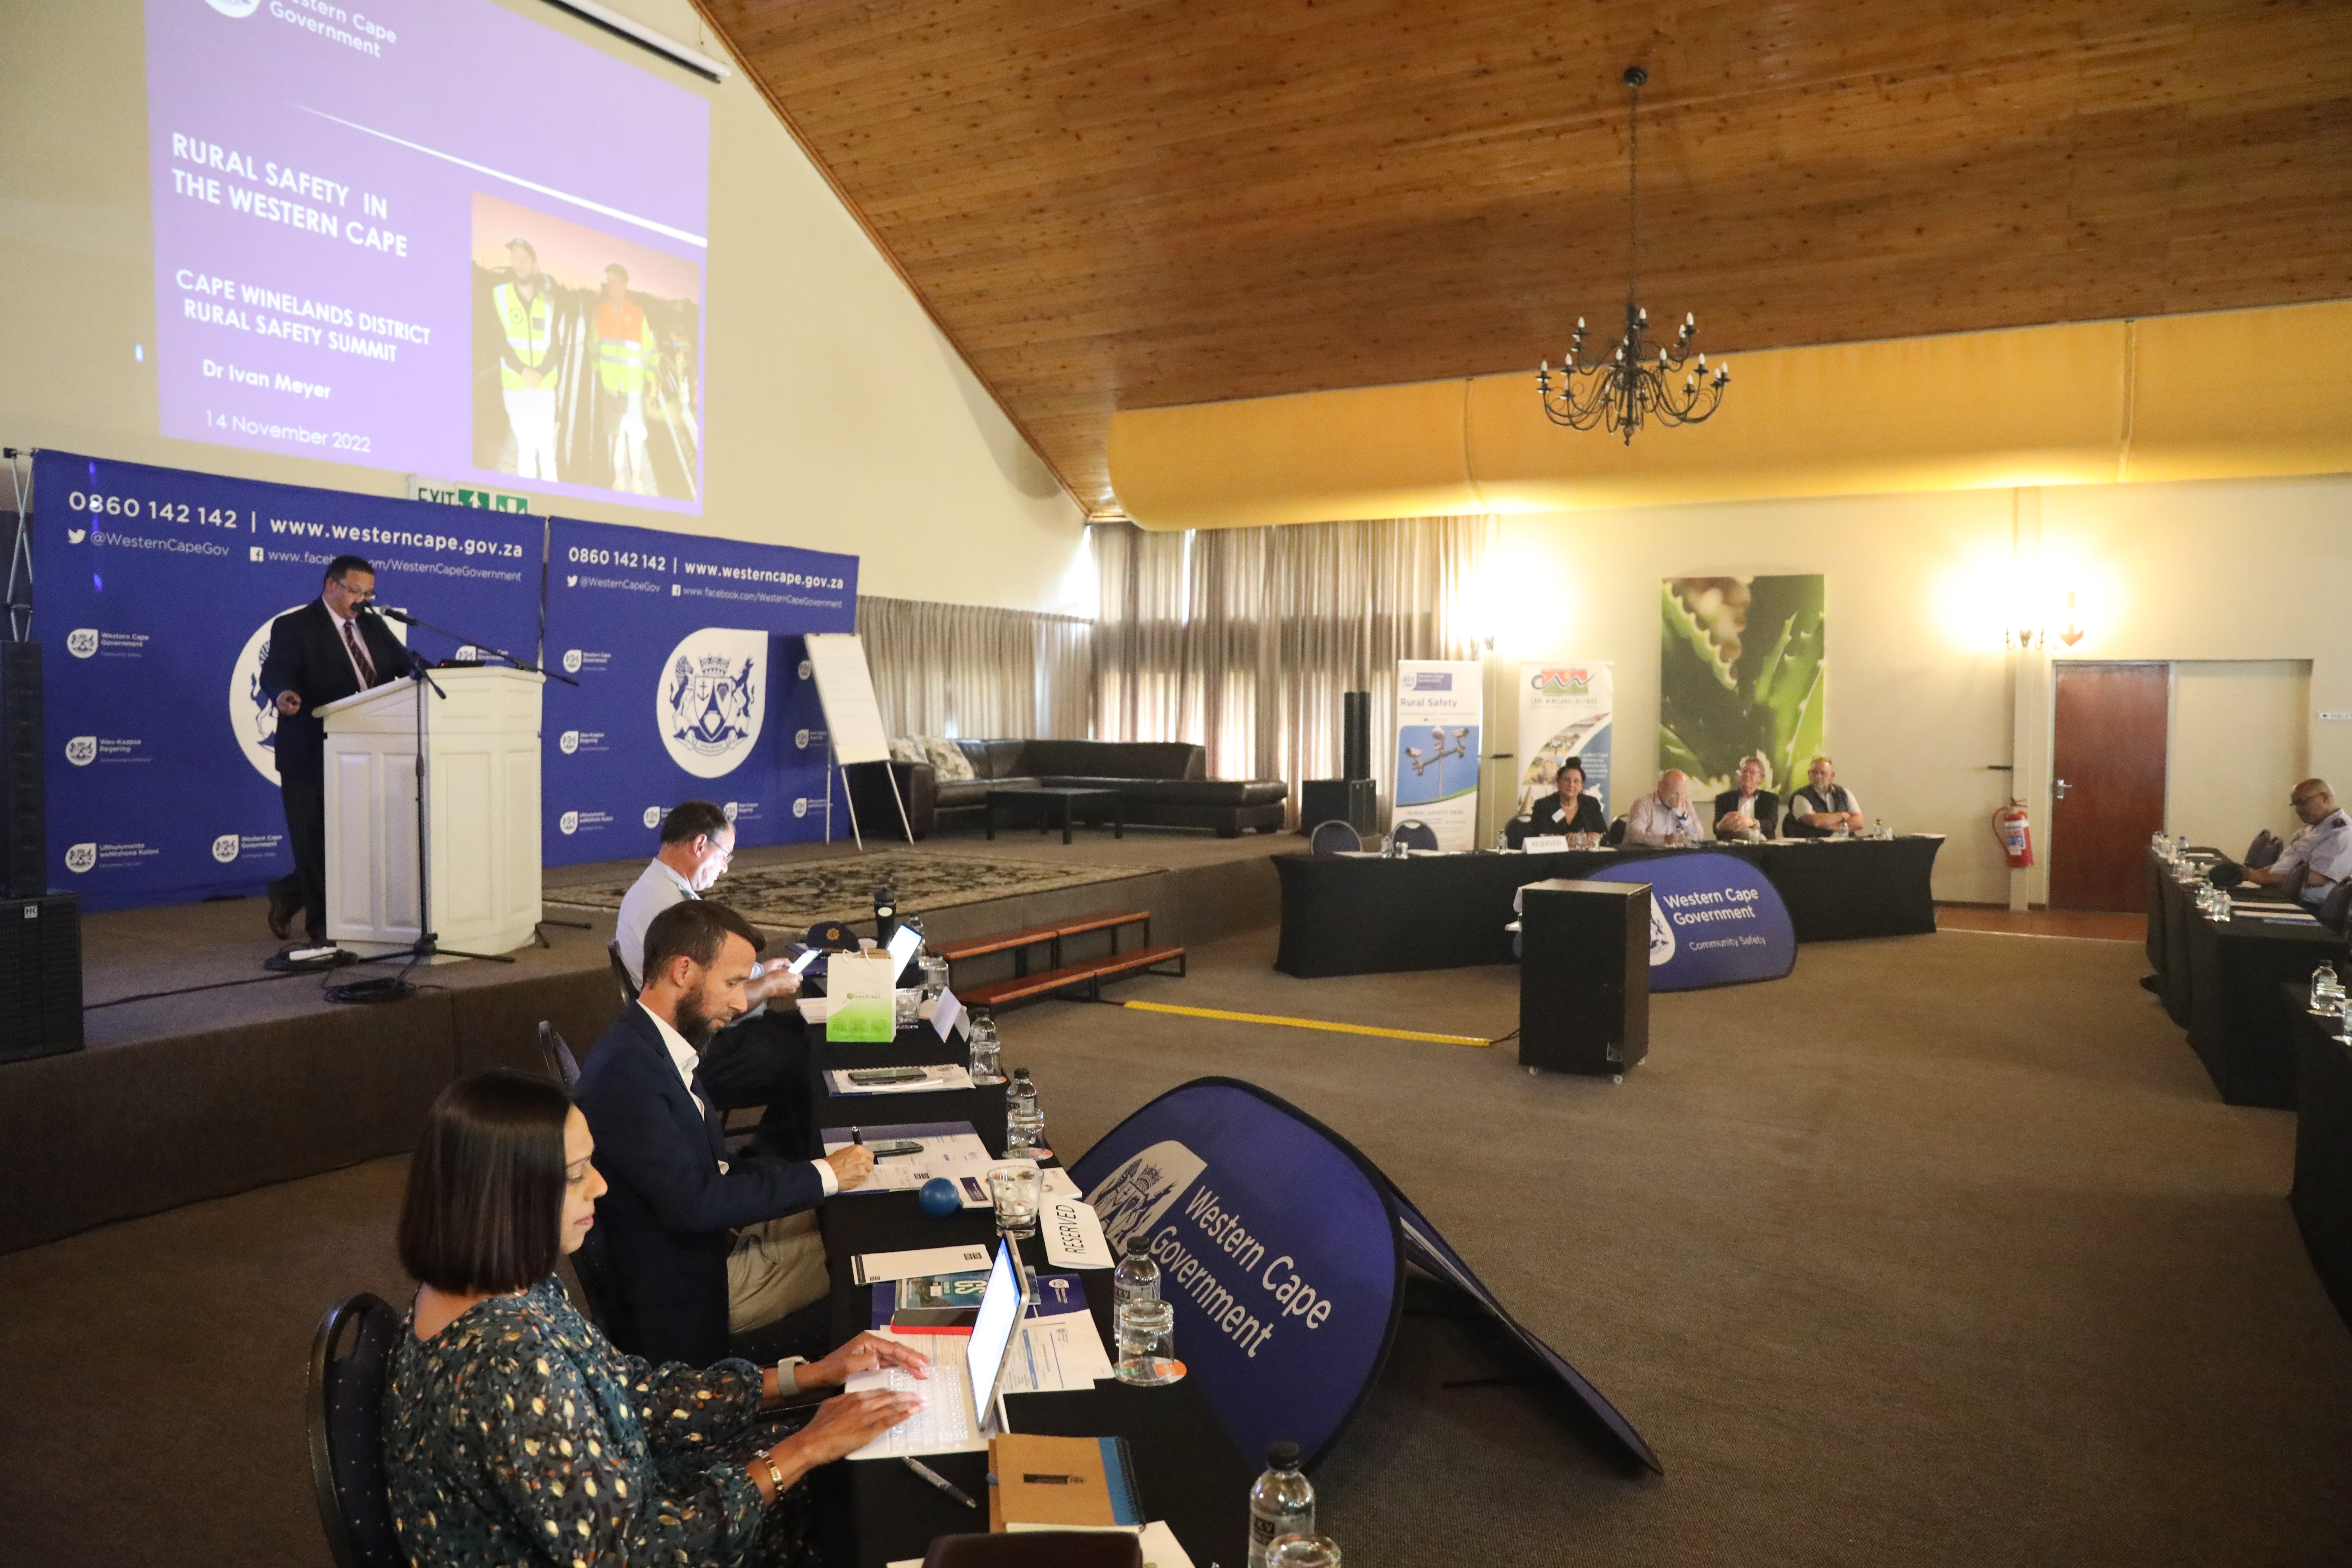  Dr Ivan Meyer, Western Cape Minister of Agriculture addresses the stakeholders at the Cape Winelands Rural Safety Summit held at Goudini Spa.